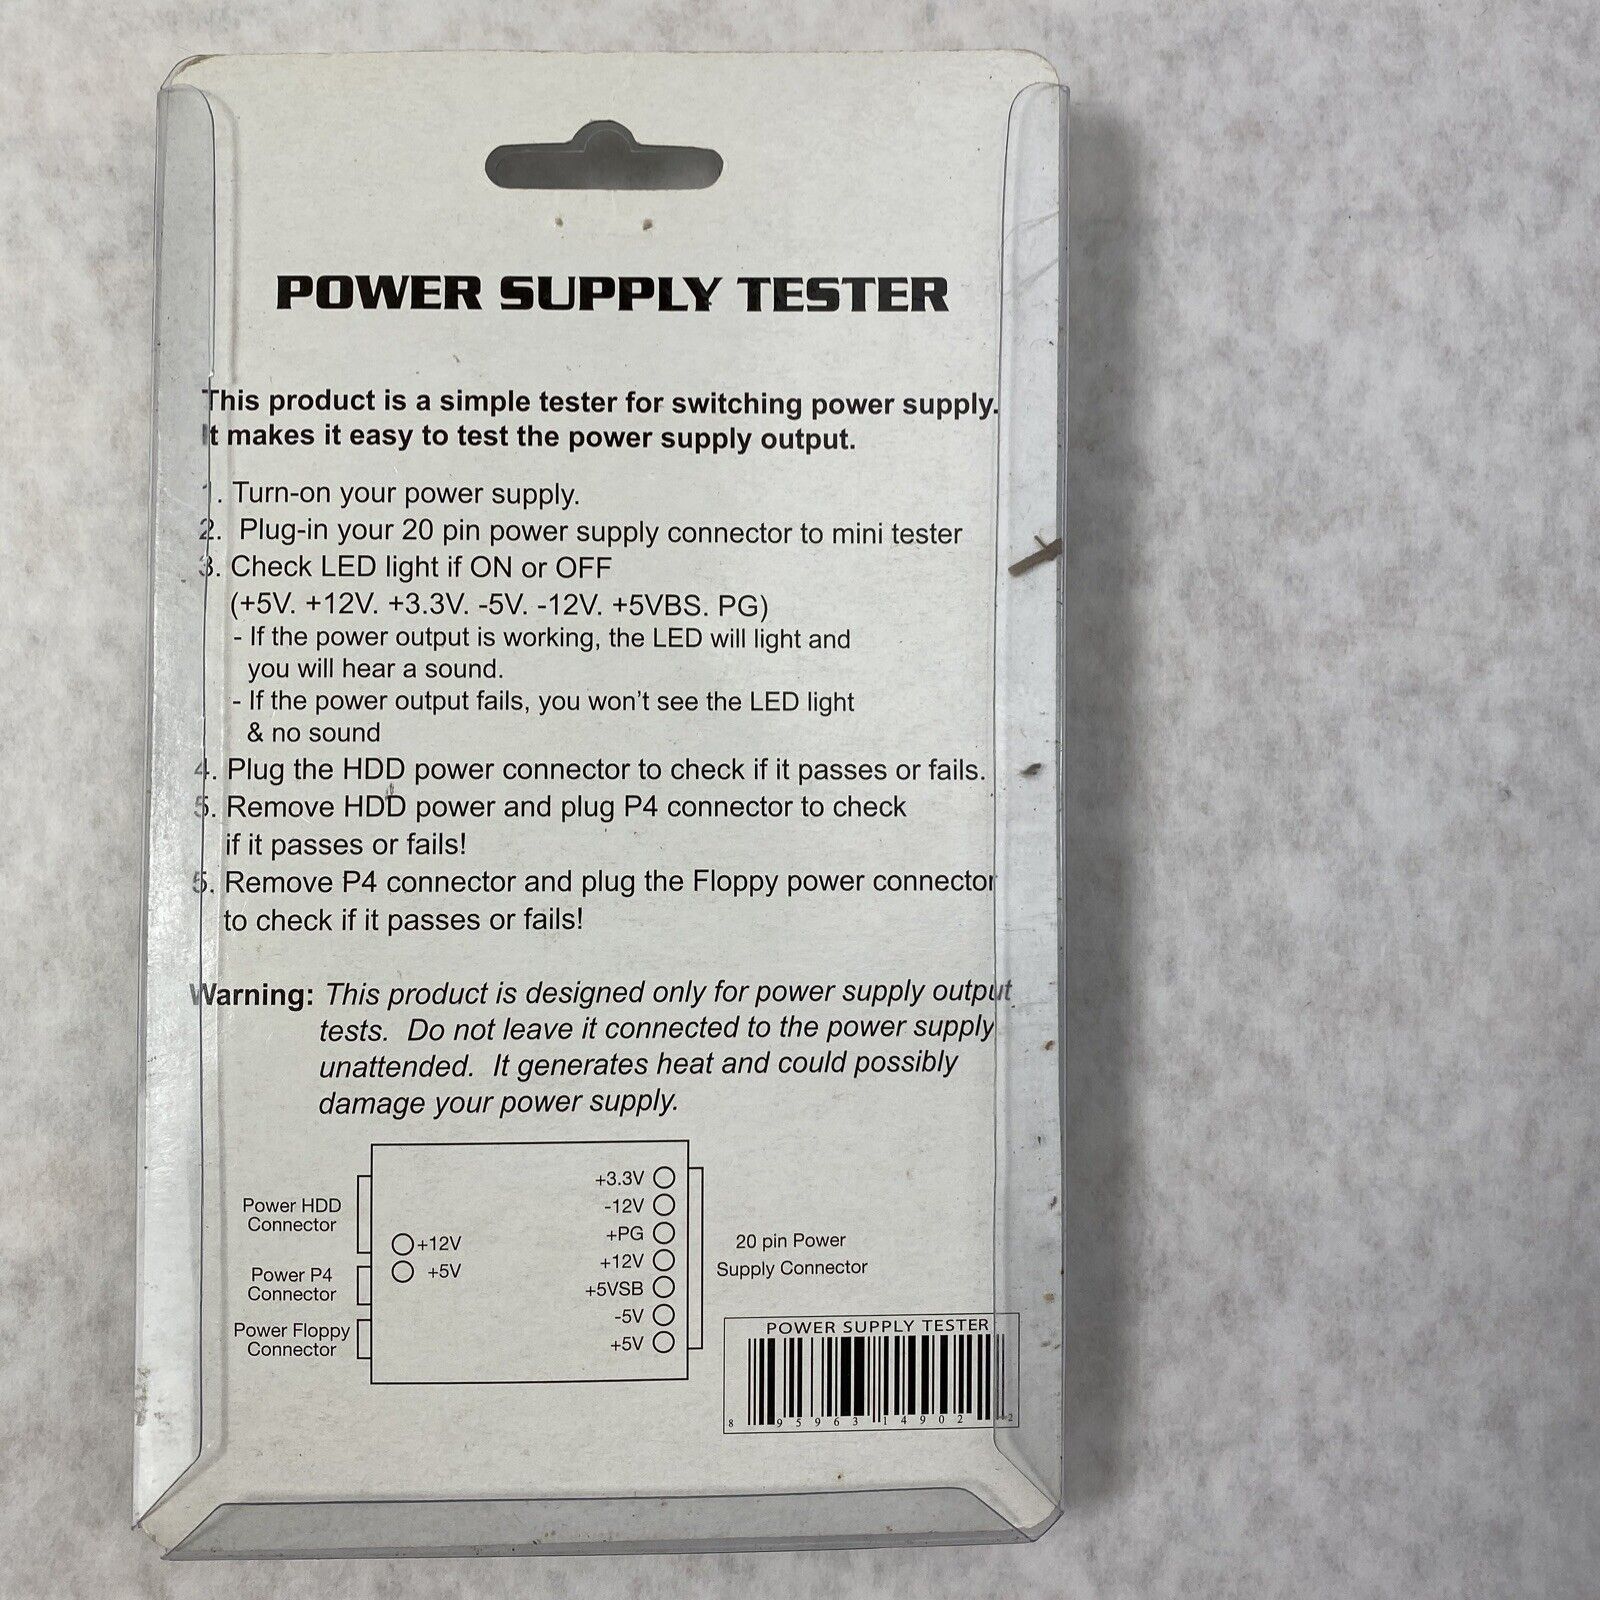 Coolmax PS-101 20 Pin Power Supply Tester